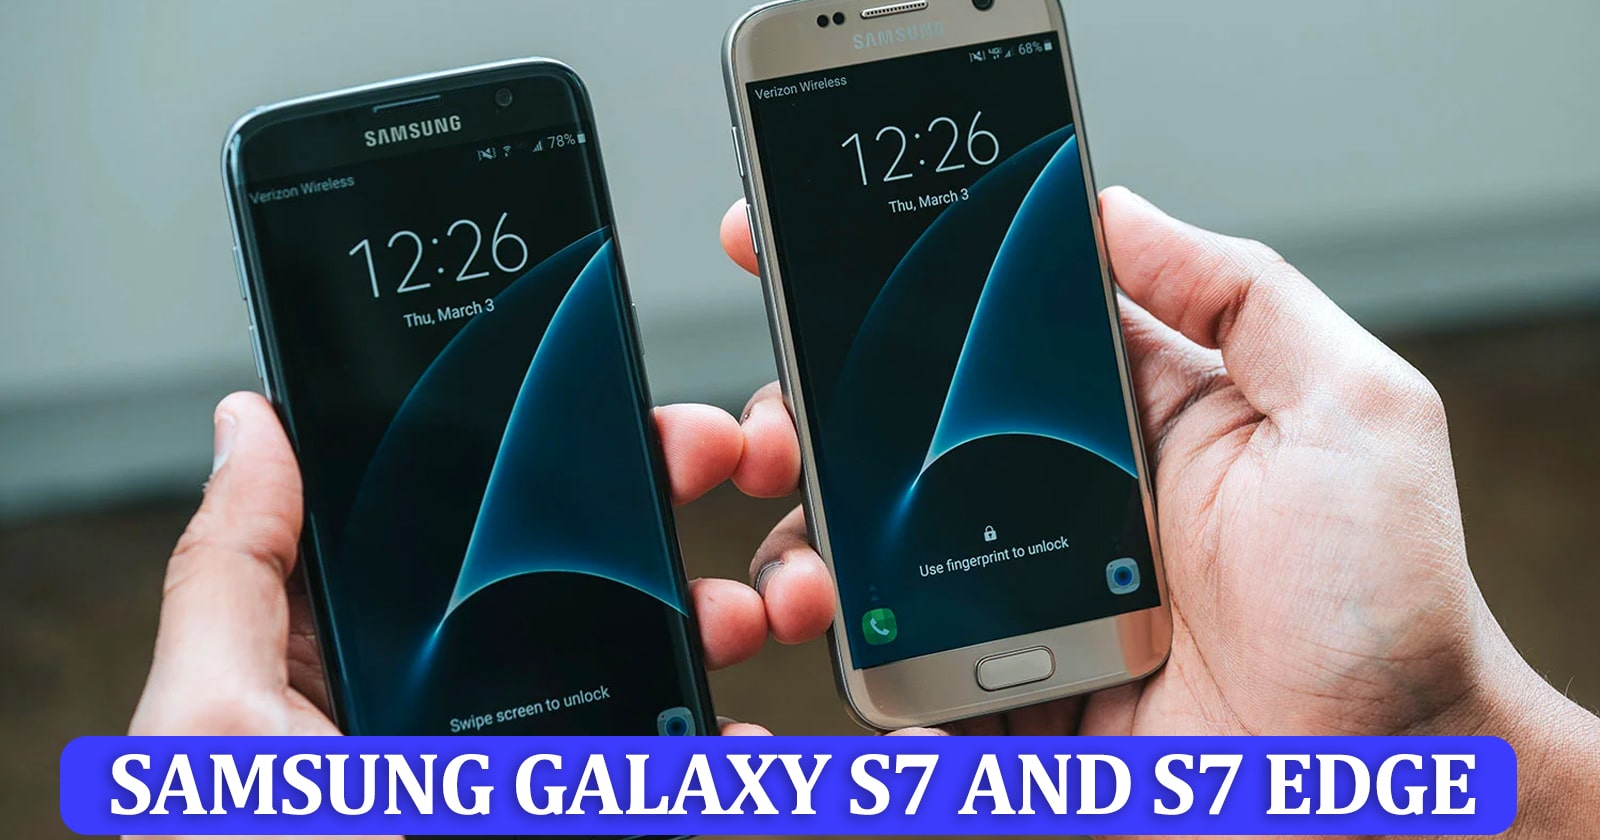 What Is the Difference Between Samsung Galaxy S7 and S7 Edge